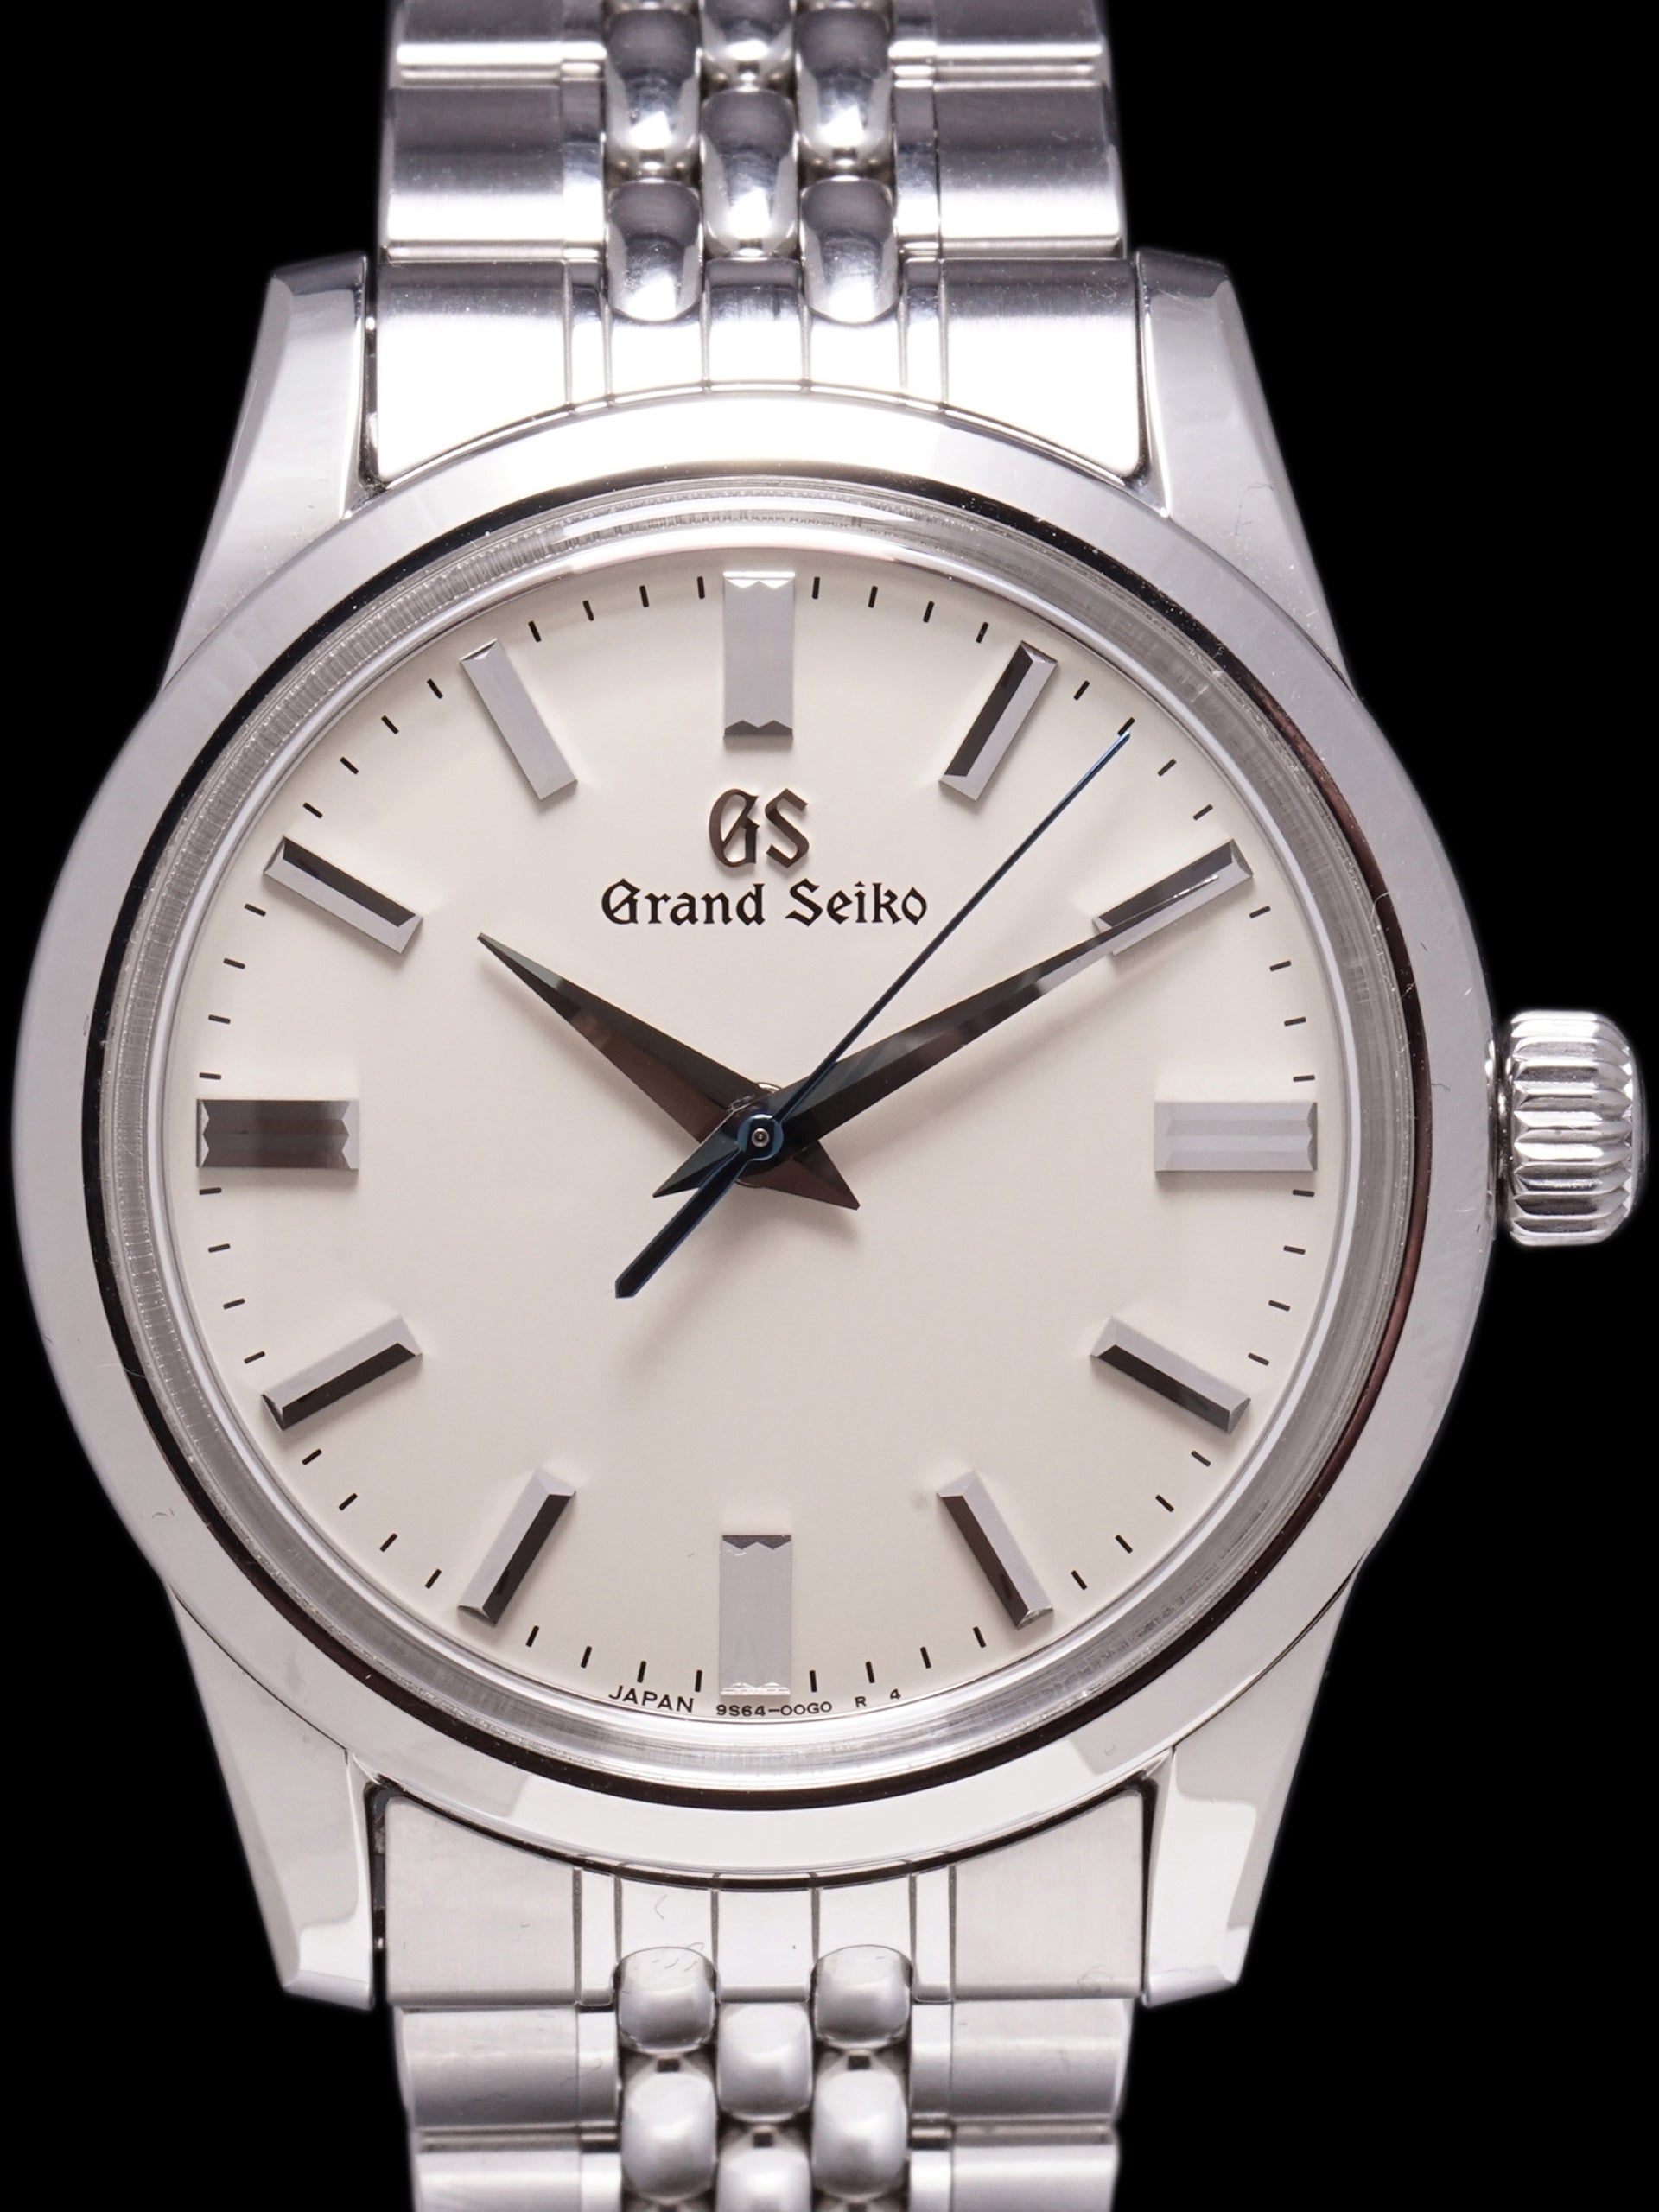 2017 Grand Seiko (Ref. SBGW235) "Japan Edition" W/ Box & Papers